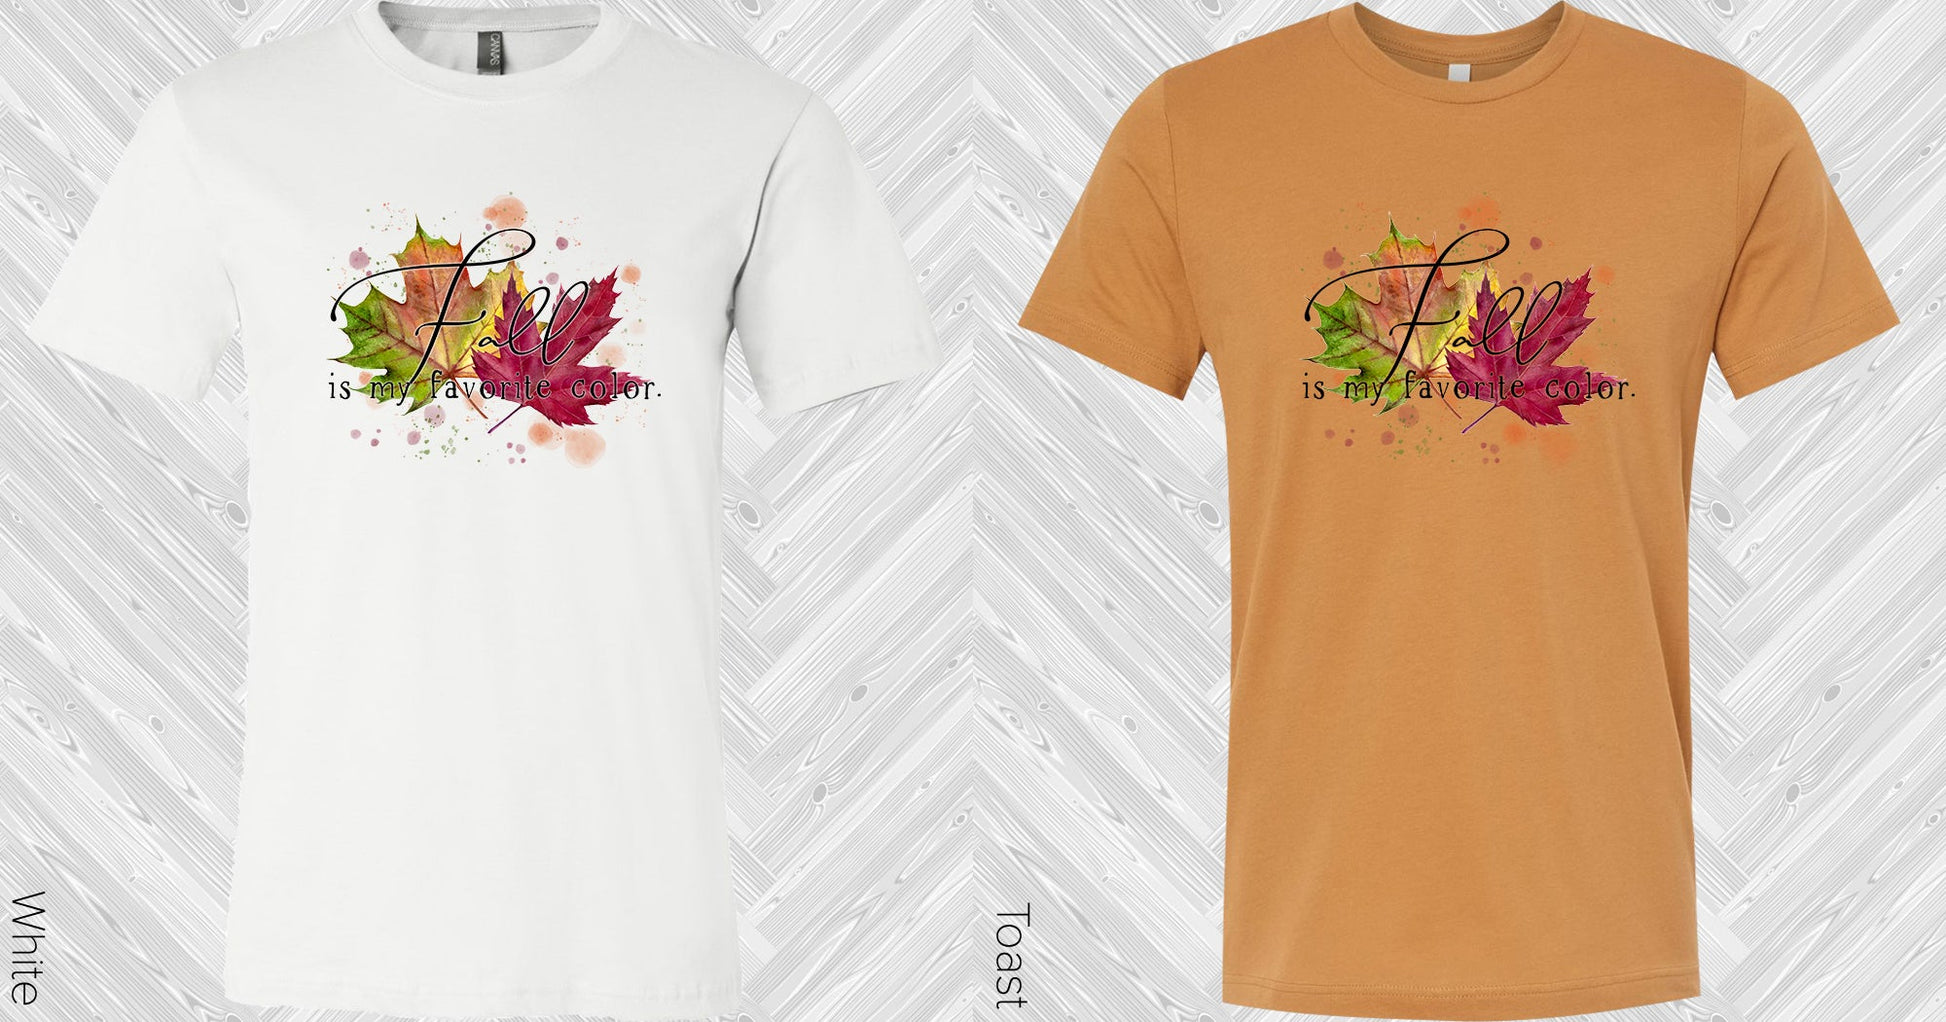 Fall Is My Favorite Color Graphic Tee Graphic Tee